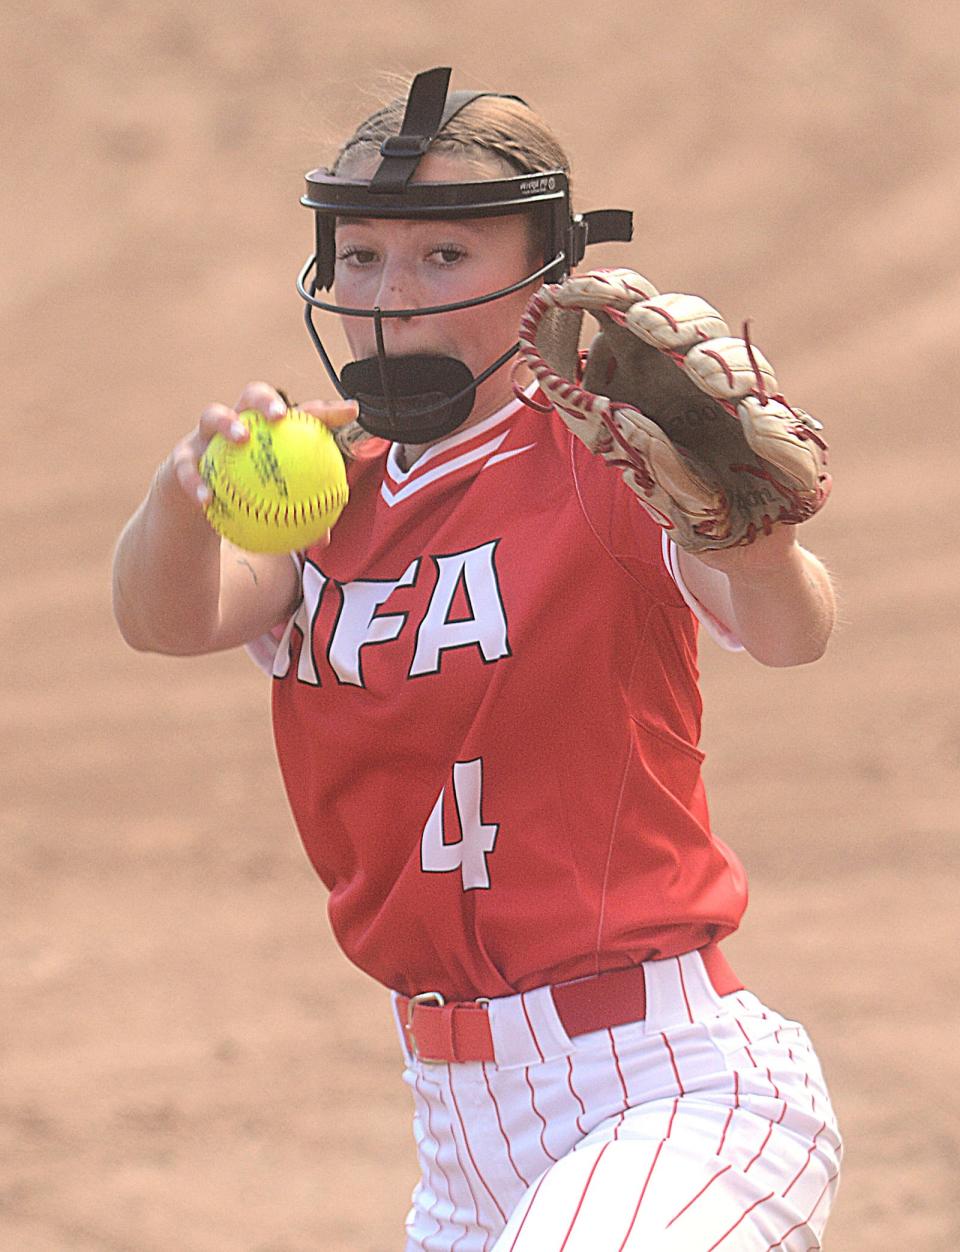 NFA's Hailey Smith pitched the Wildcats to wins over Waterford and Glastonbury this week.